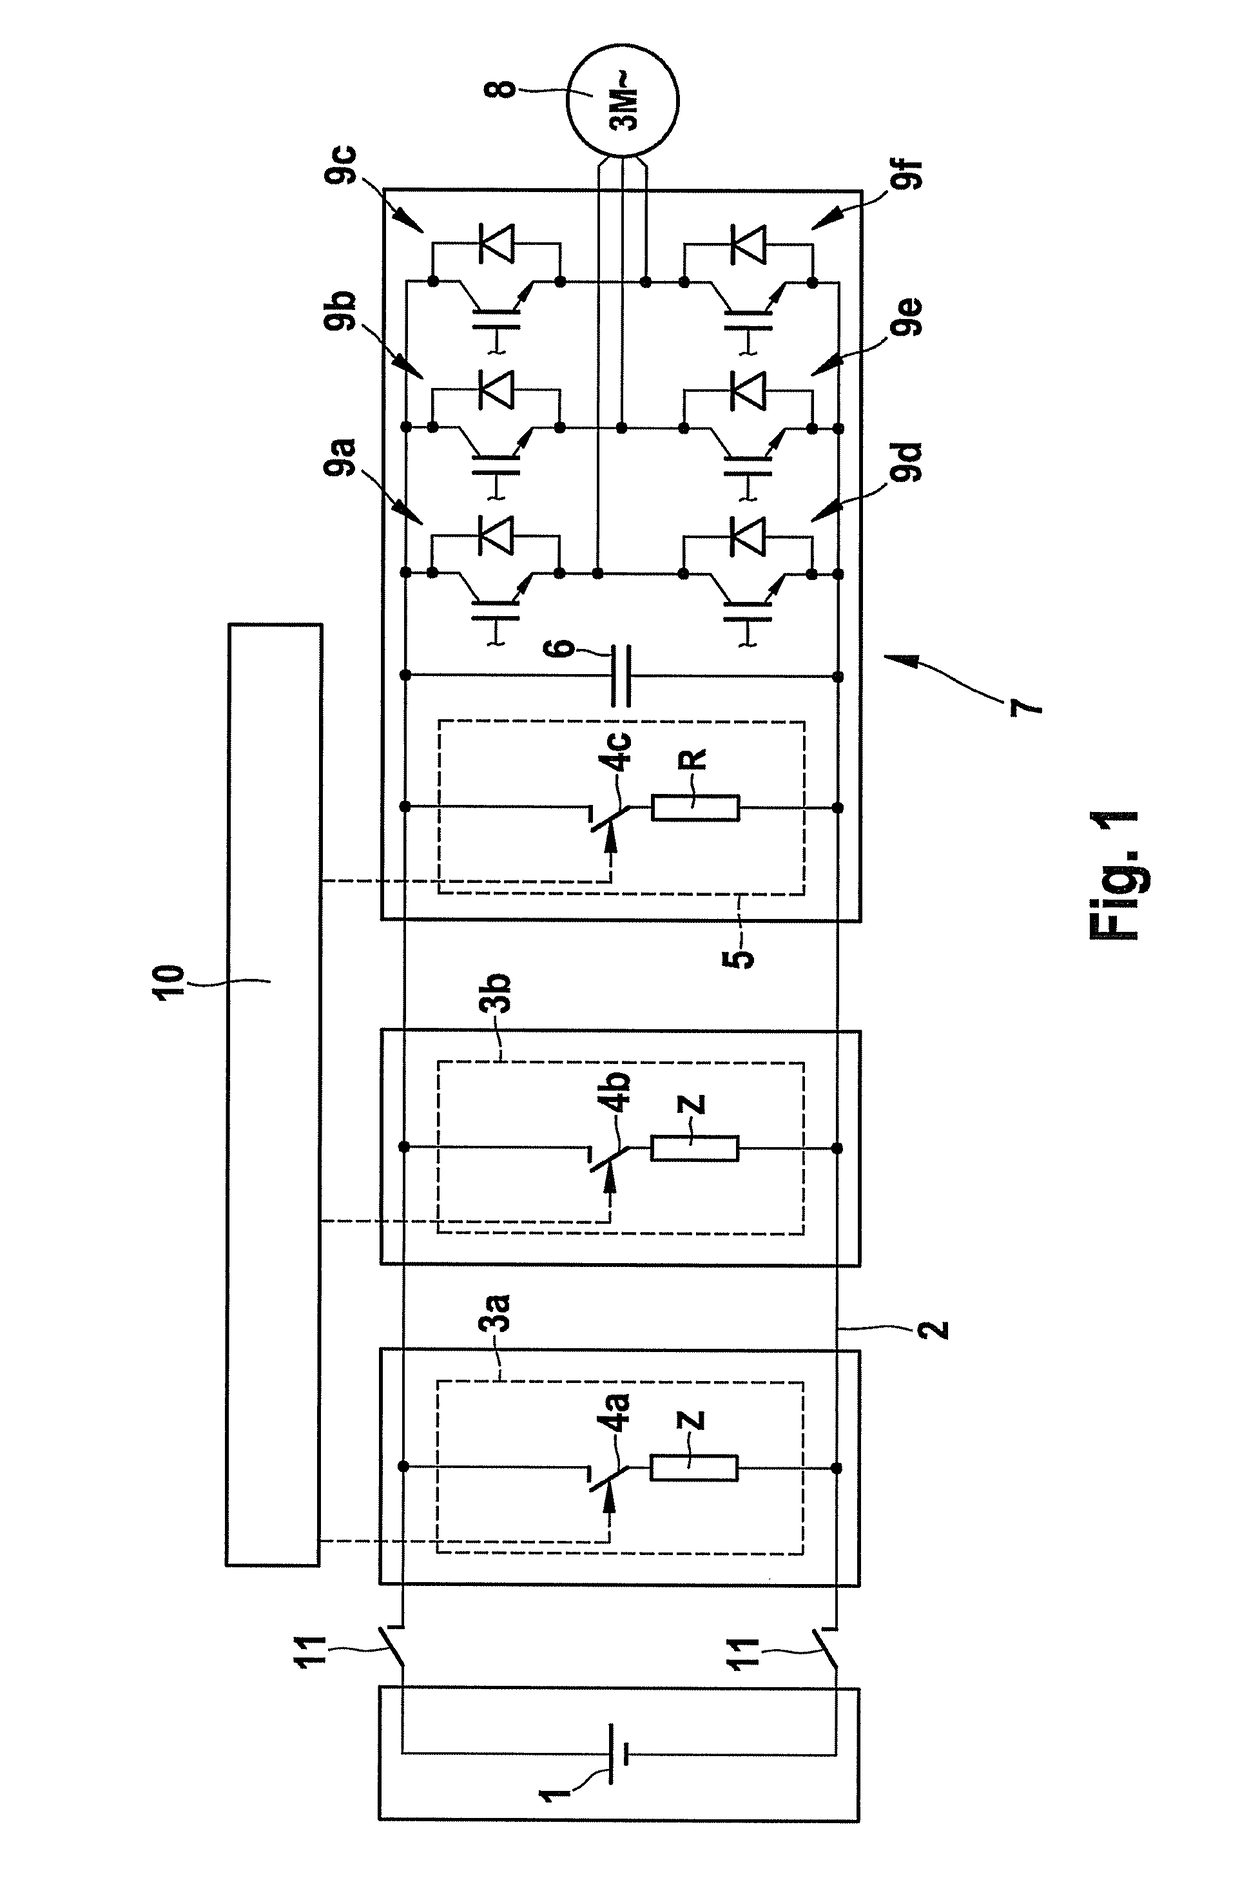 Method and device for discharging a high-voltage system